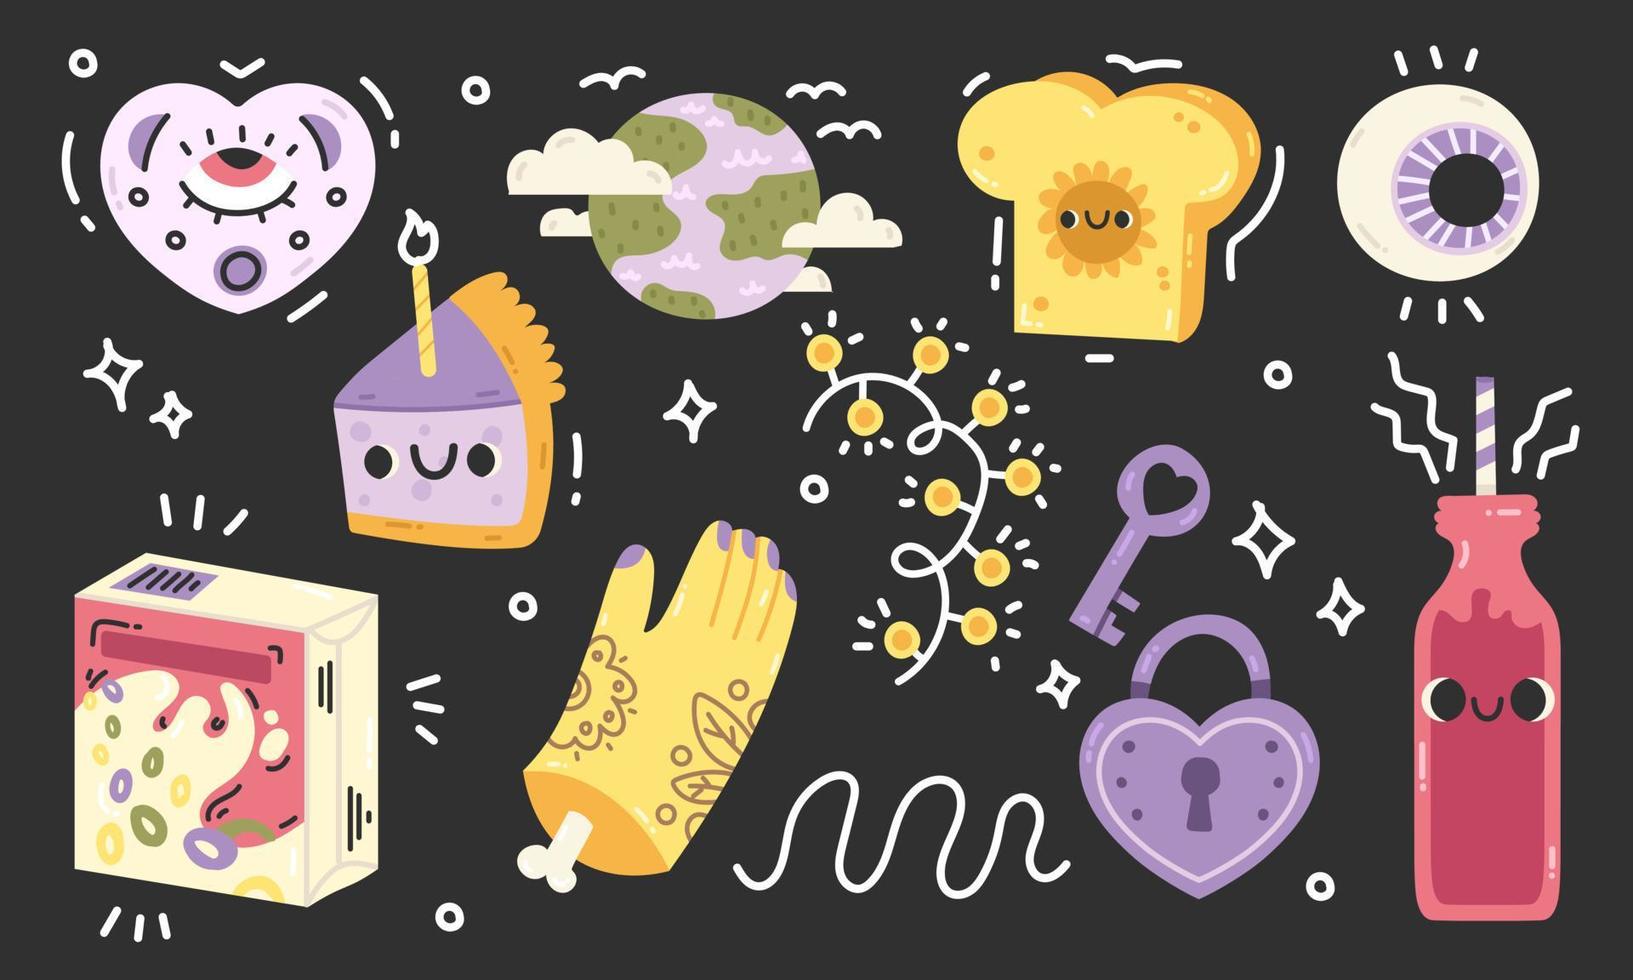 Hand drawn Hand drawn bright kawaii characters. Big Set of Different colored Vector illustartions. Cute a piece of cake, a planet, an eye, flakes, a key with a lock, lanterns. Cartoon style. Wallpaper